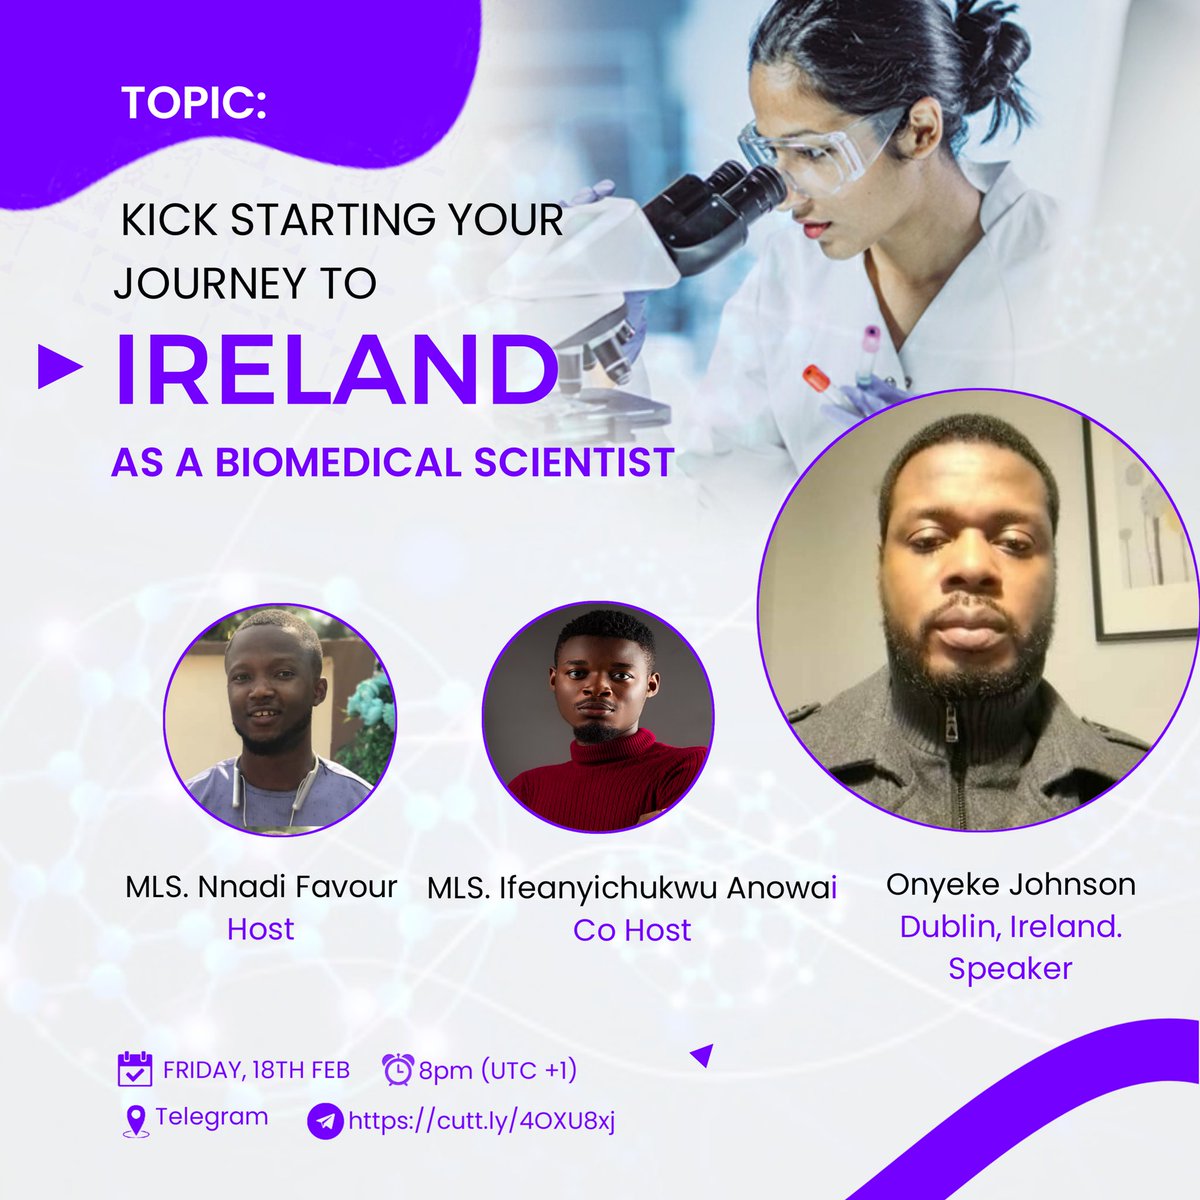 Kicks starting your journey to Ireland as a Biomedical Scientist, Almost 500 members in the telegram group✔ Thanks to @jcomls for agreeing to be my guest tonight, if you have not joined the telegram group. Kindly use this link: t.me/+Taj80_QfnD40Y… RT please🙌